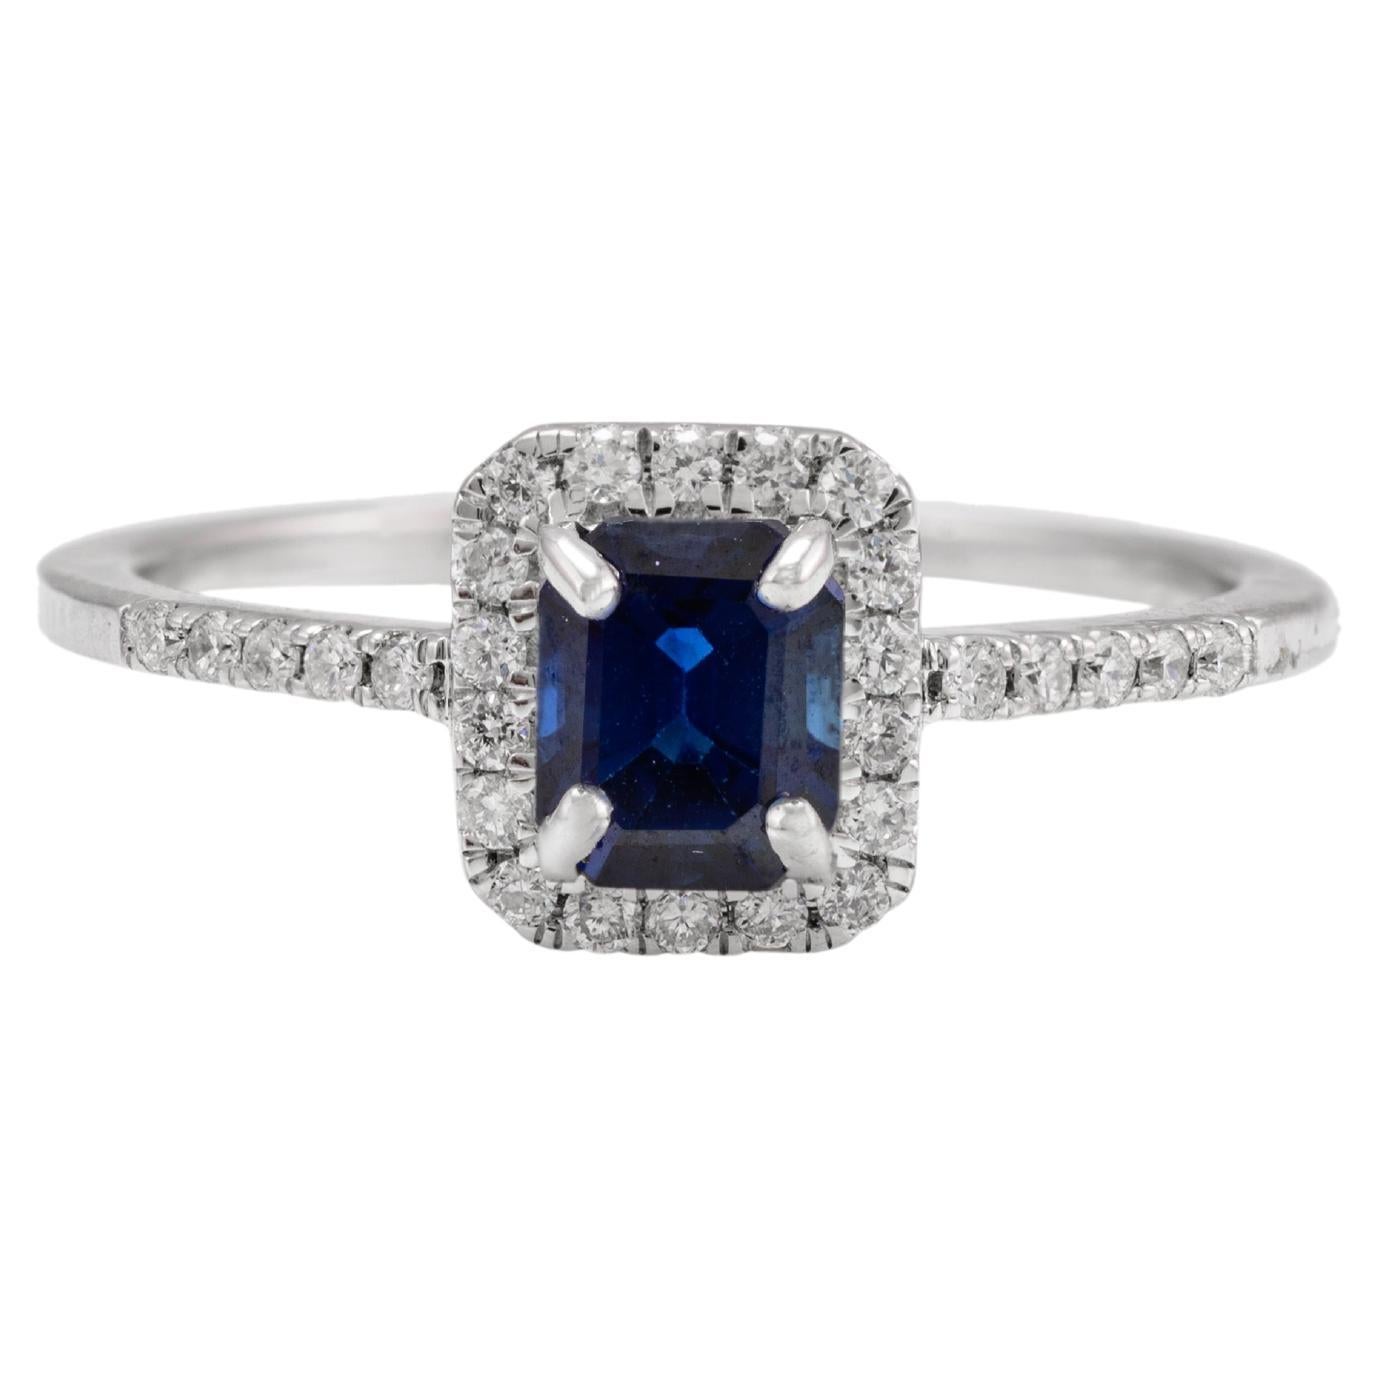 For Sale:  18k Solid White Gold Octagon Blue Sapphire and Diamond Halo Engagement Ring